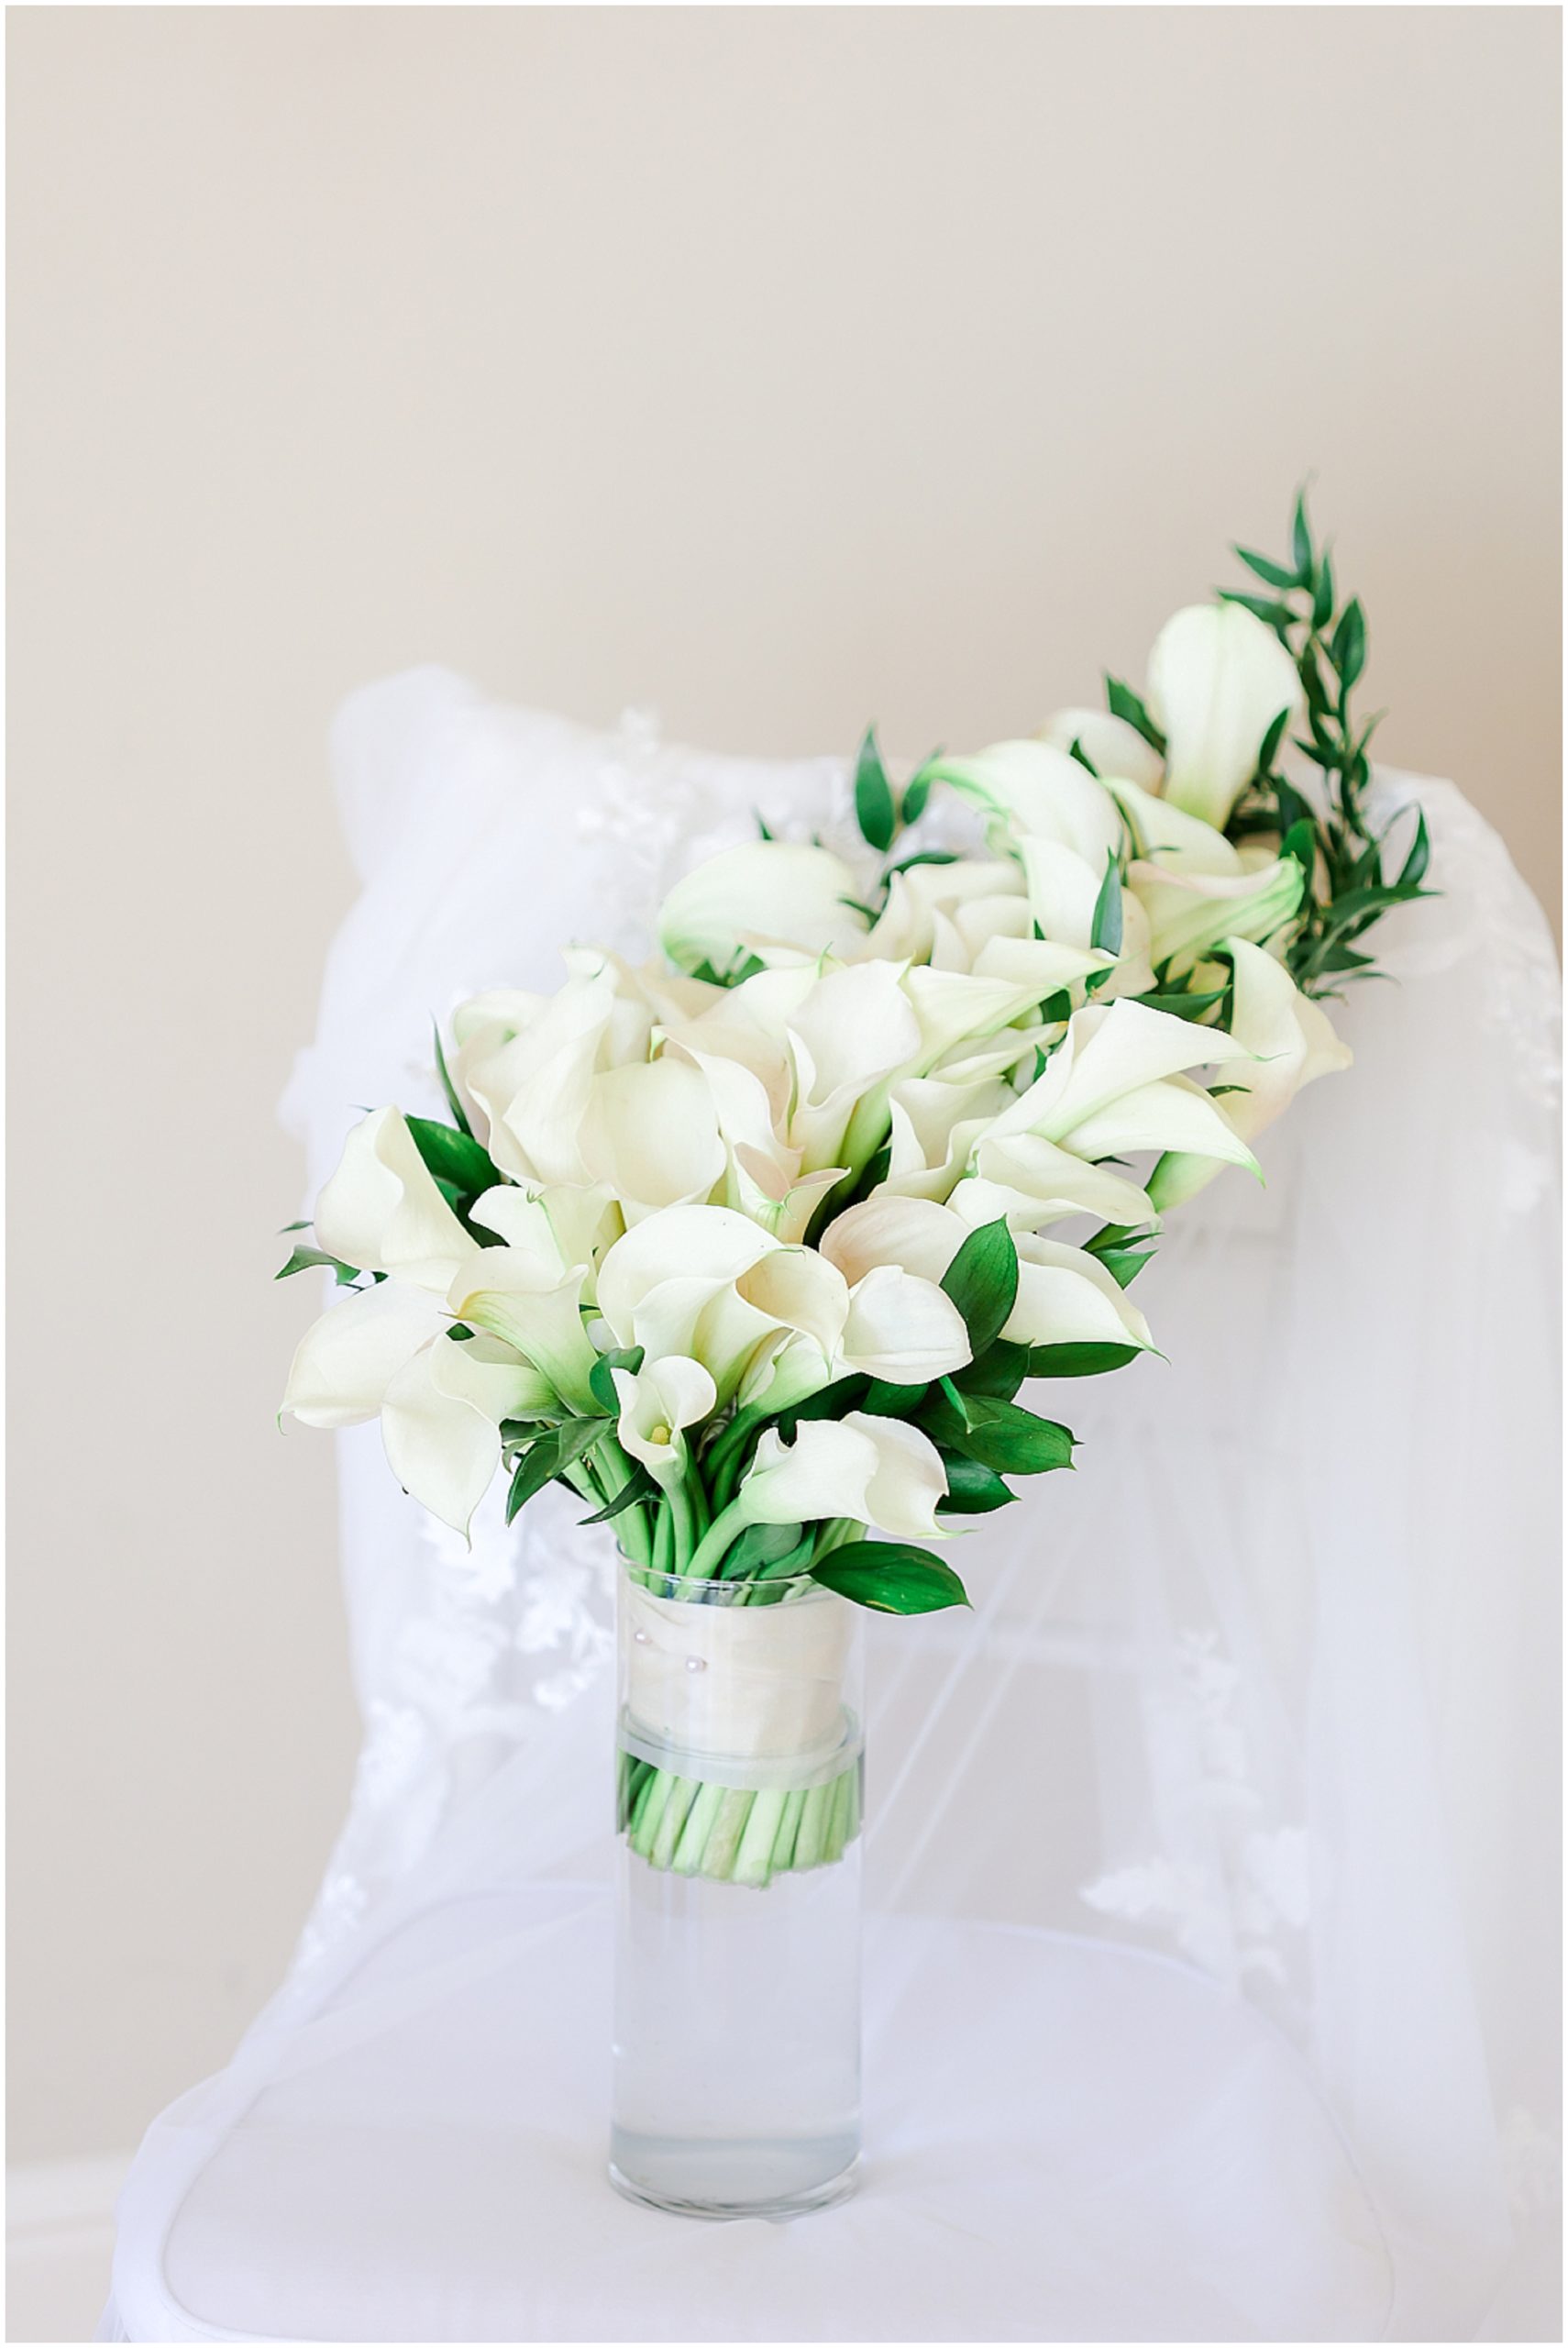 A Hawthorne House Wedding in Parkville | Wedding Venue in Kansas City | Wedding Photography | Fall Wedding | Wild Hill Flower | Pretty & Planned | Mariam Saifan Photography | White Flower Lily Inspiration | Lace Wedding Dress